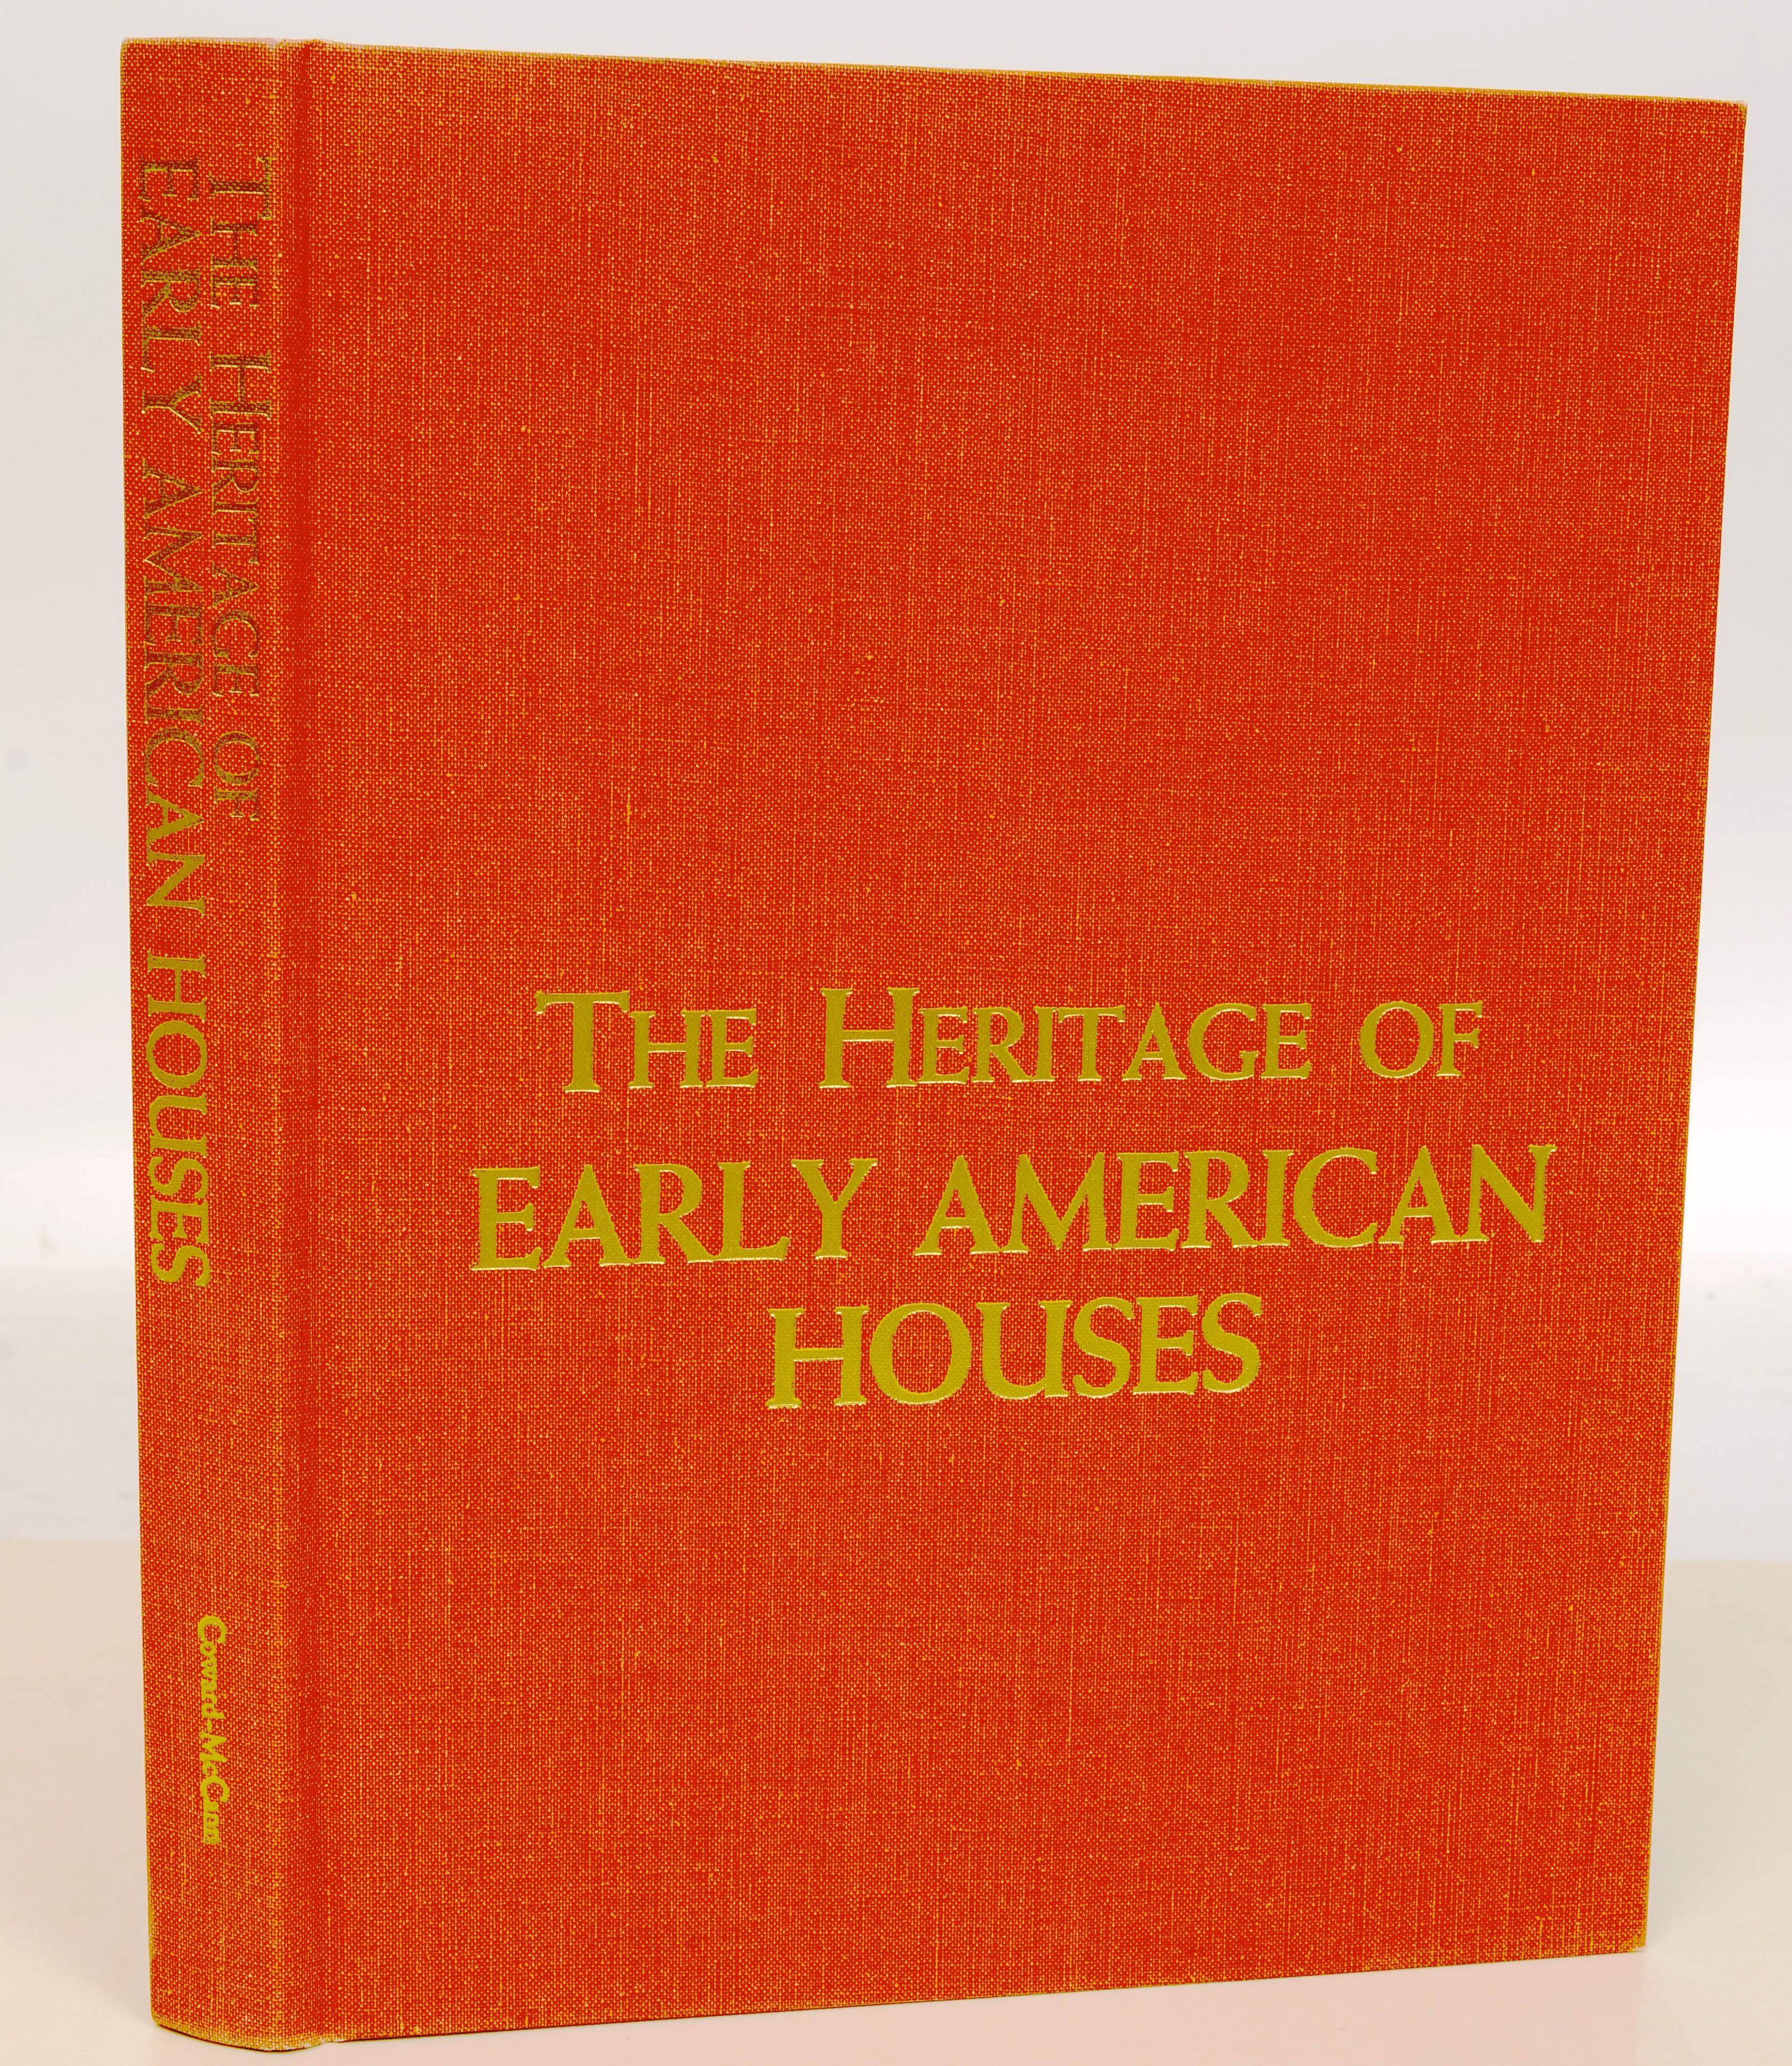 The Heritage of Early American Houses by John Drury. Coward-McCann/ Country Beautiful, New York/ Waukesha, Wi, 1969. 1st Ed hardcover with dust jacket. 298 pp. 40 full-page color plates and approximately 250 b&w. This book discusses the inhabitants